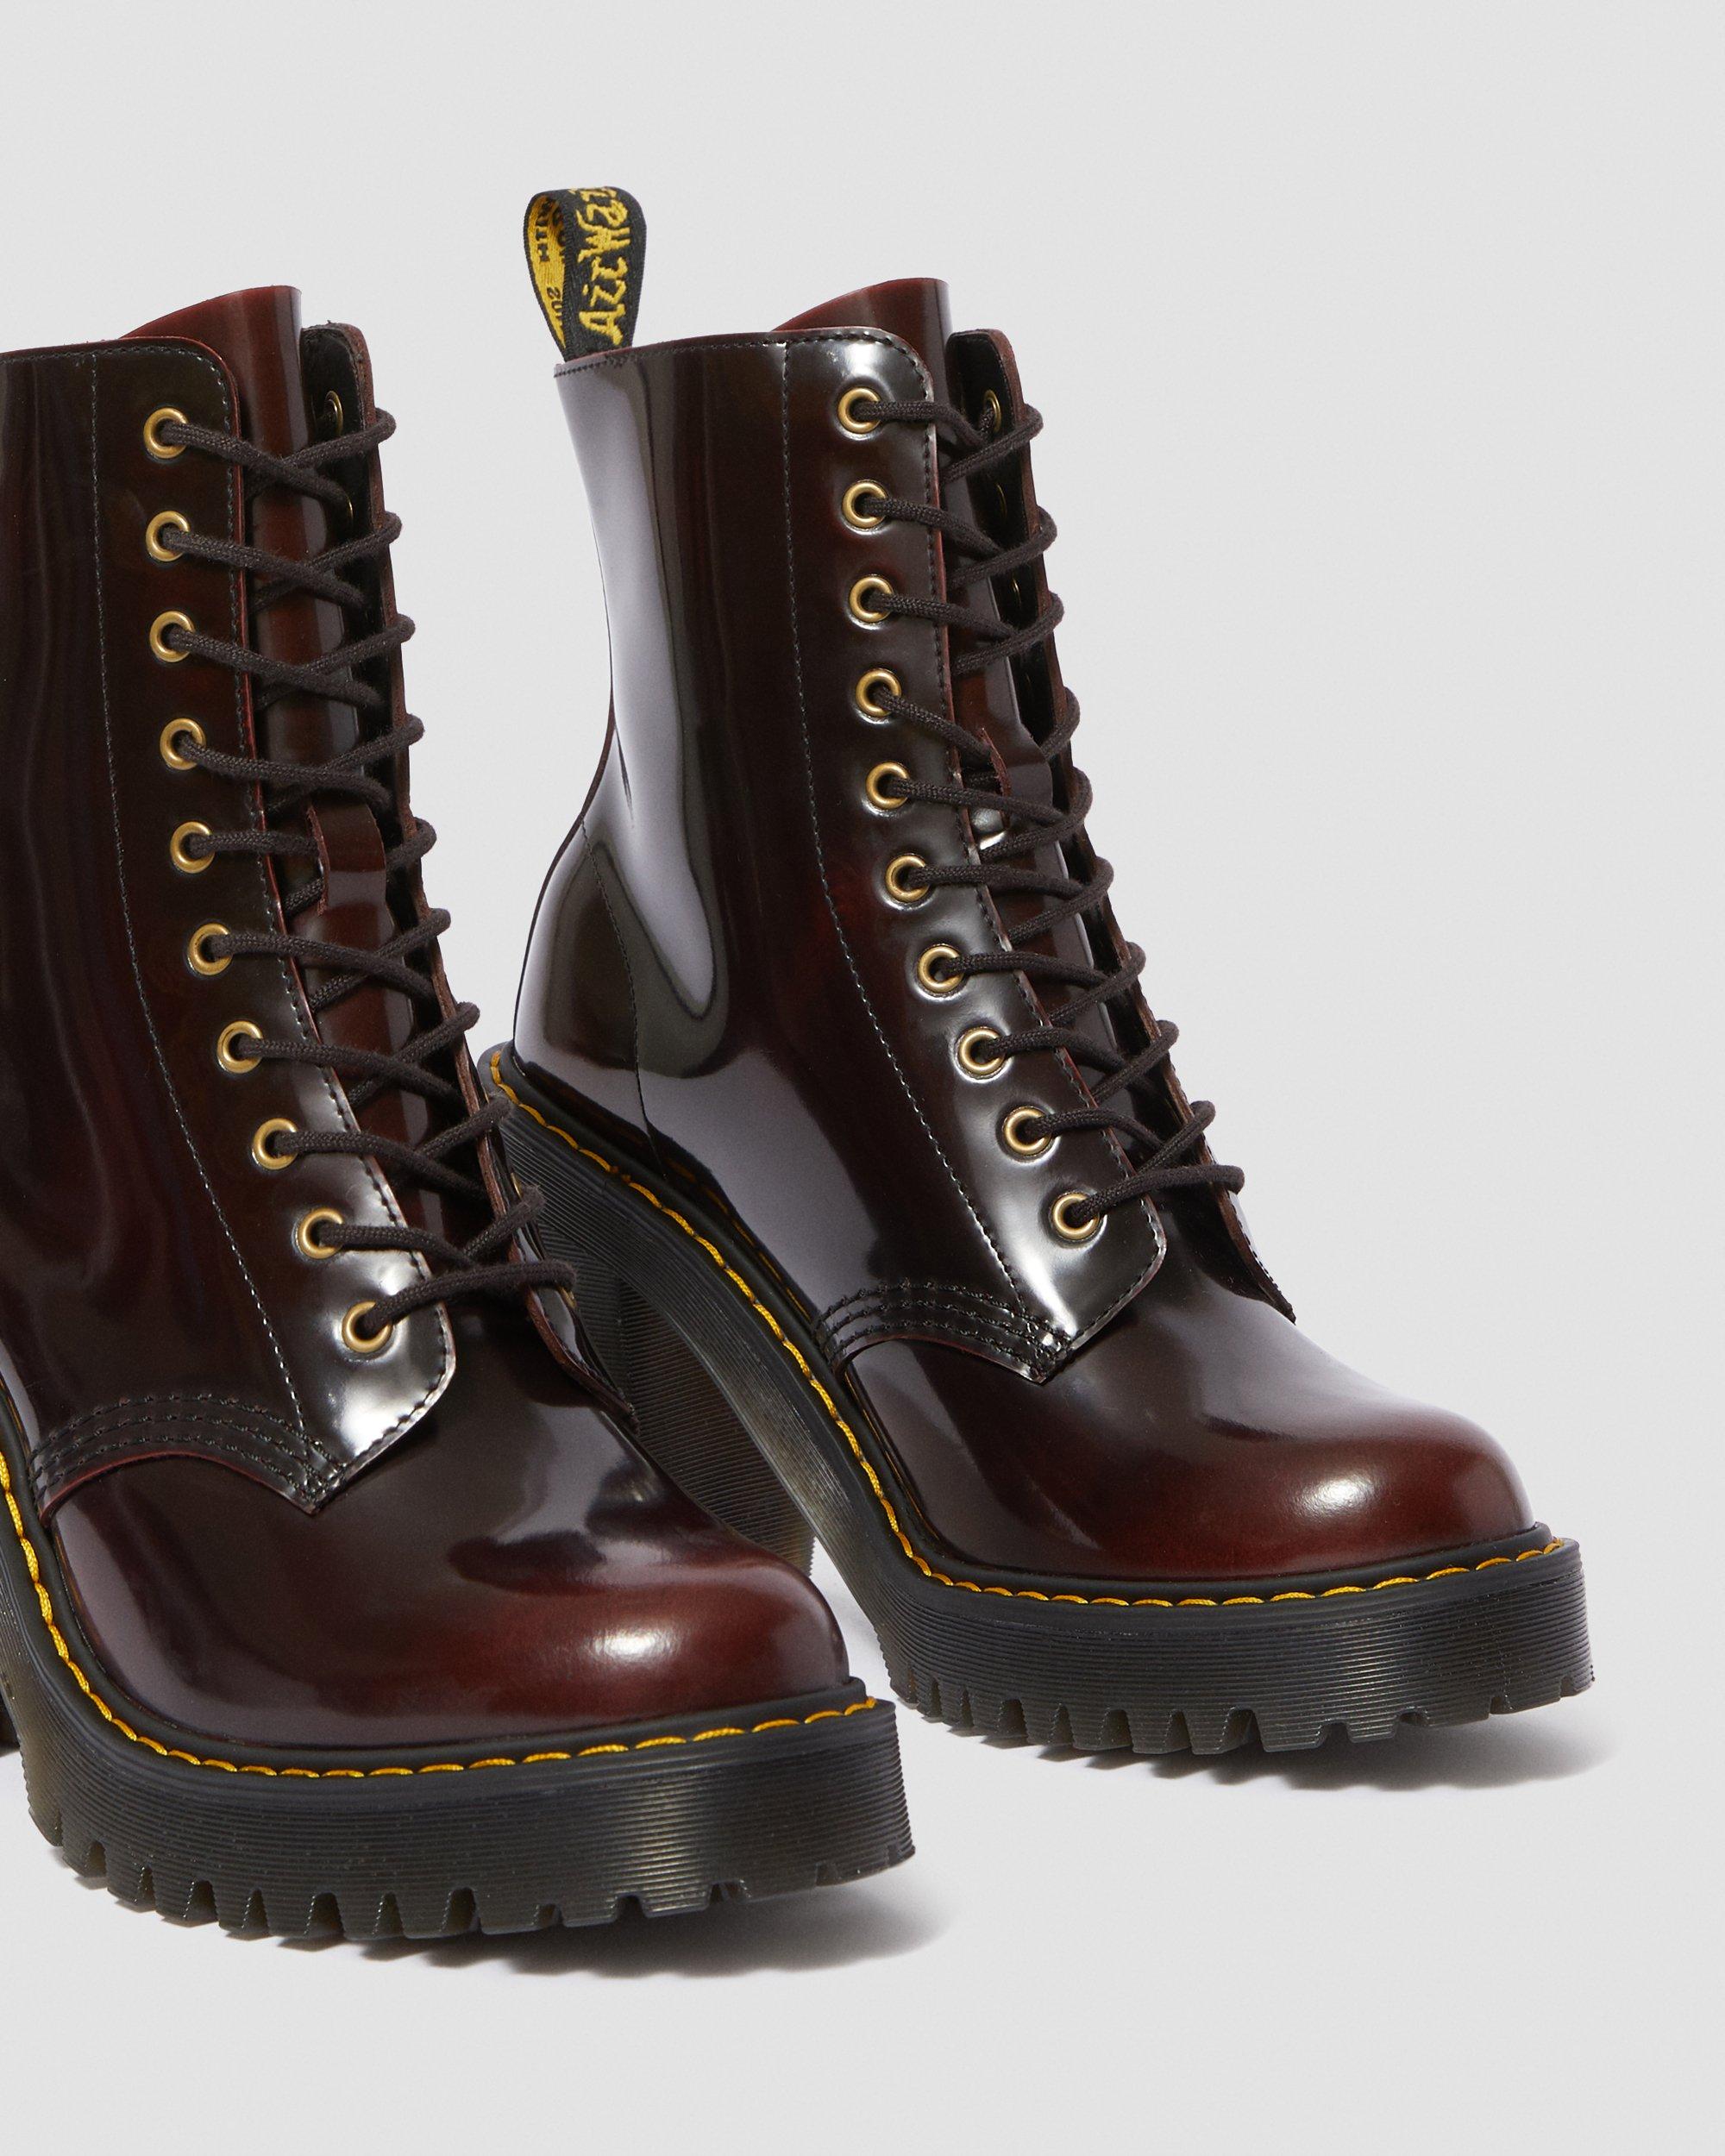 dr martens kendra cherry leather heeled ankle boots